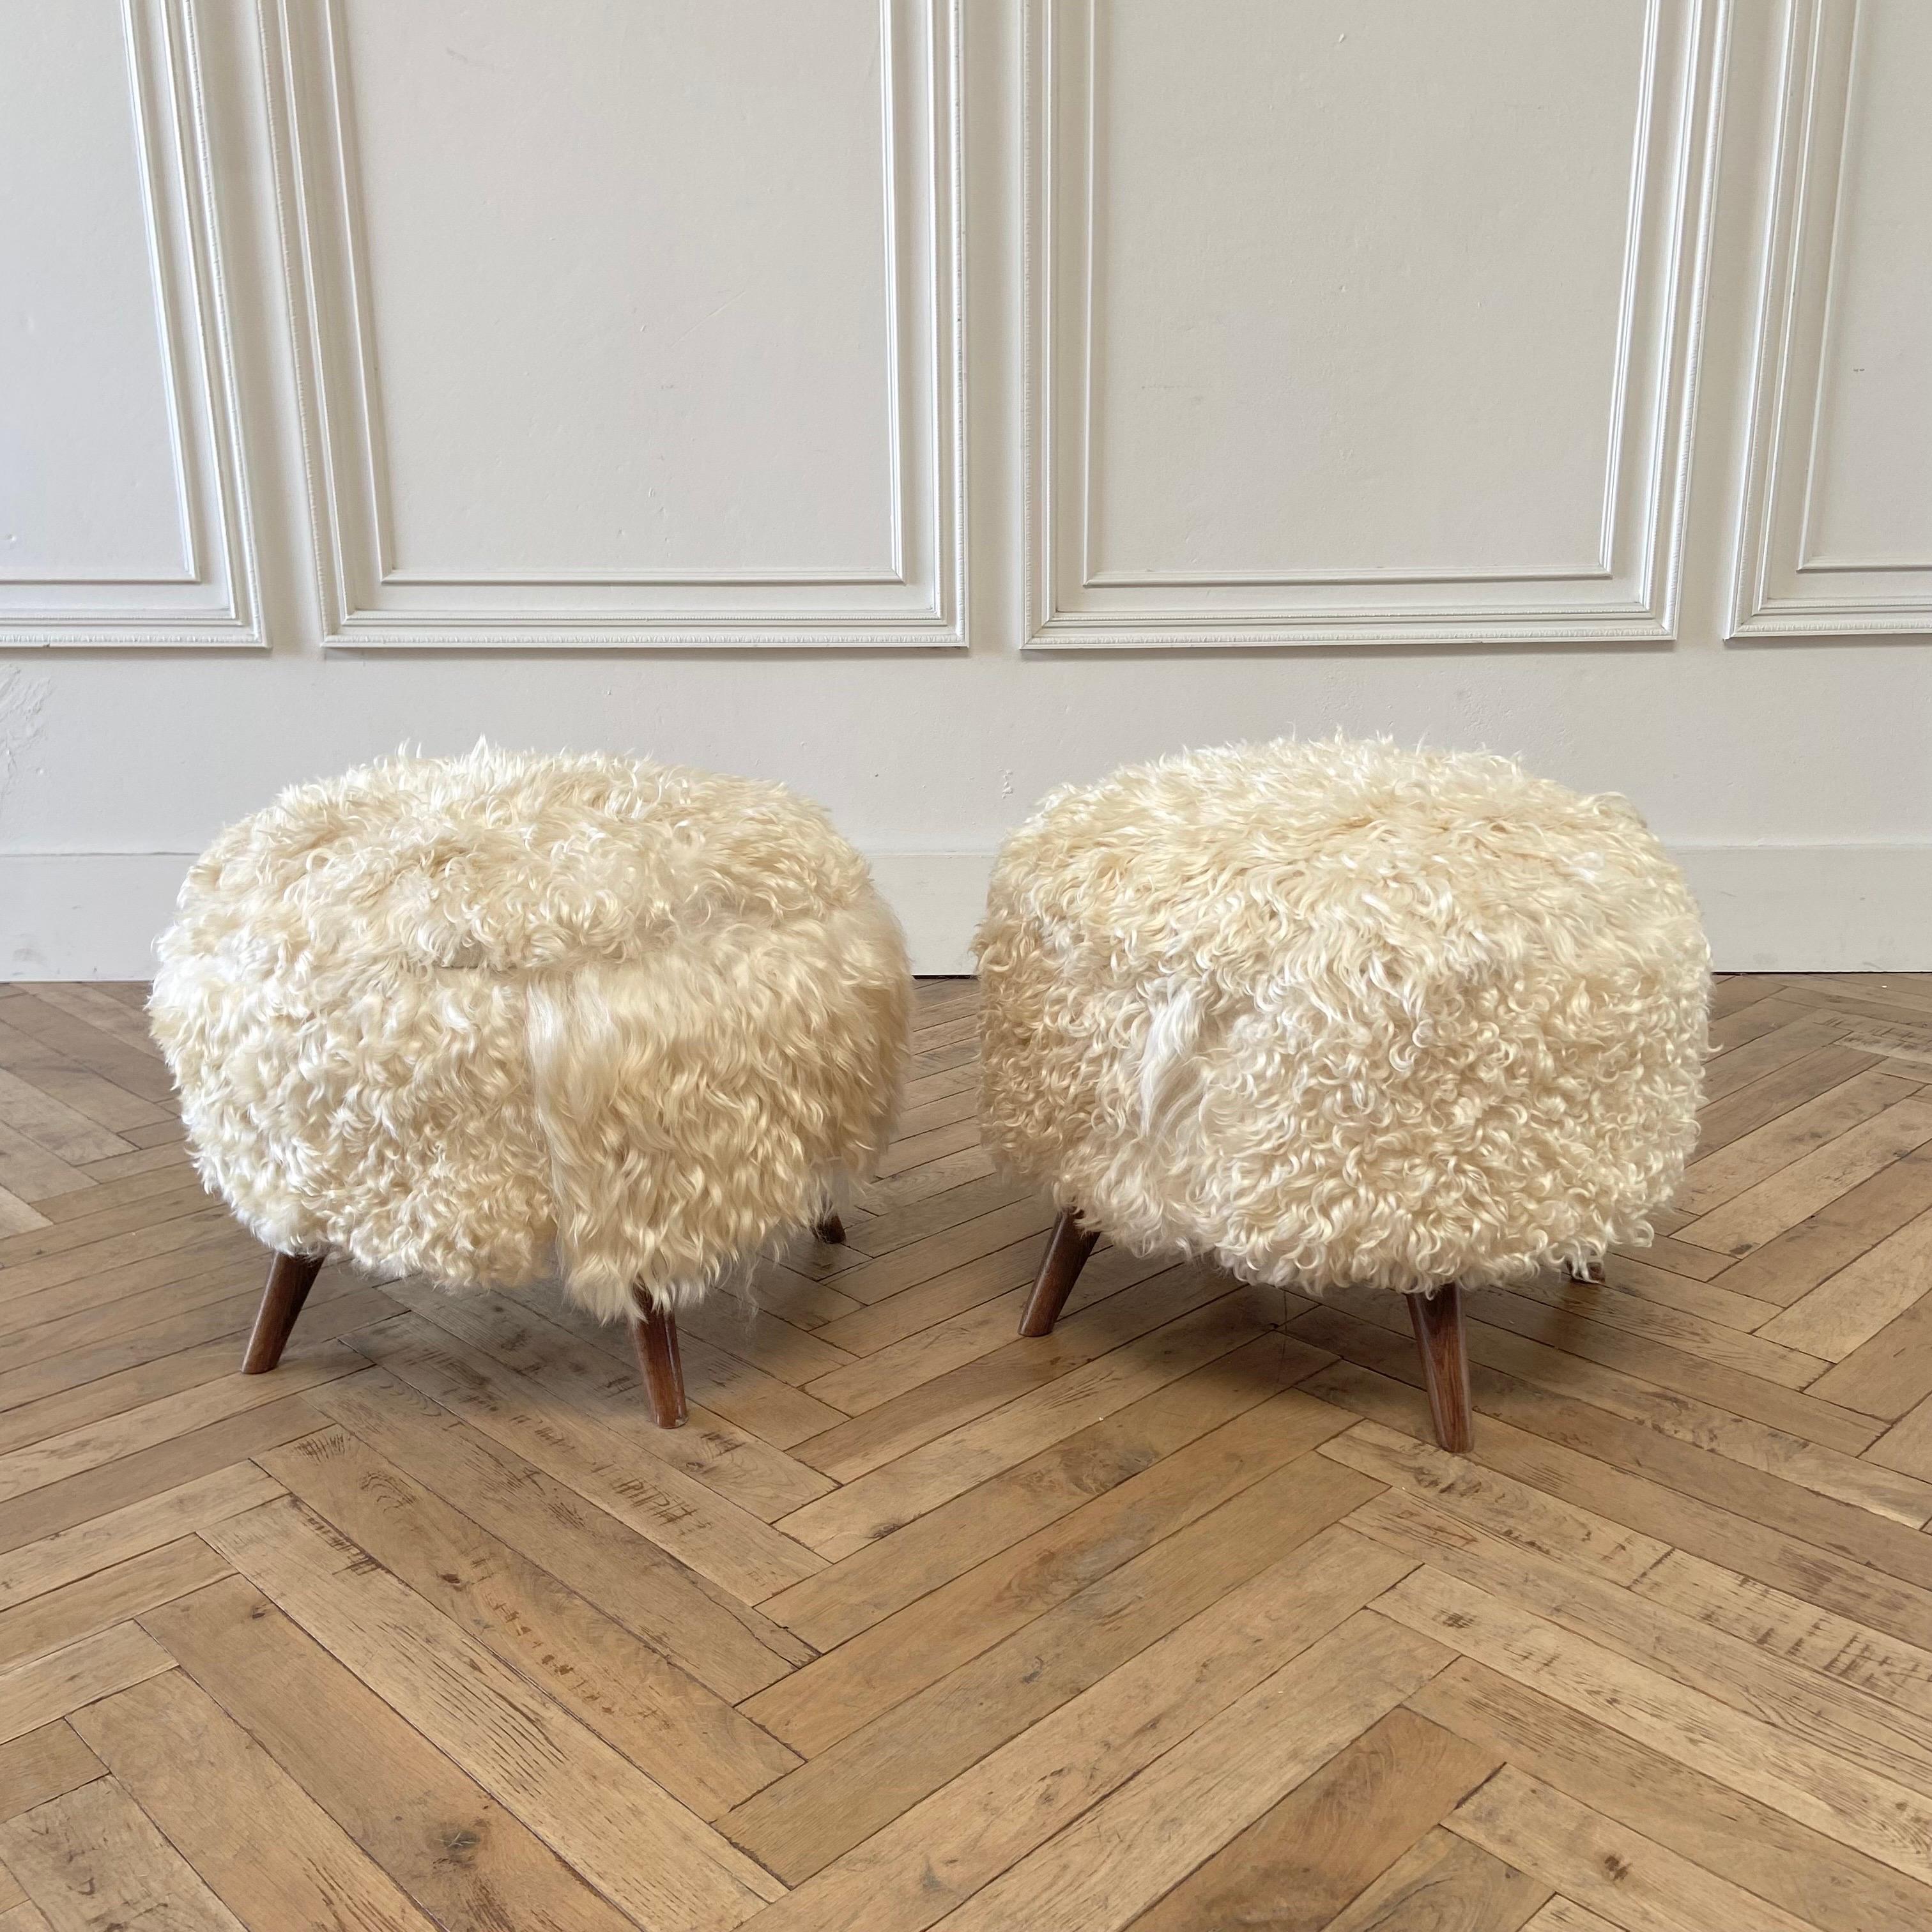 Lamb hide ottomans 
Size: 22”rd. X 18”h
Natural color, these hides have a soft curly medium-long hair. These are real natural hides, they will show different lengths of hair, and some areas may appear curlier than other areas. 
Extremely soft to